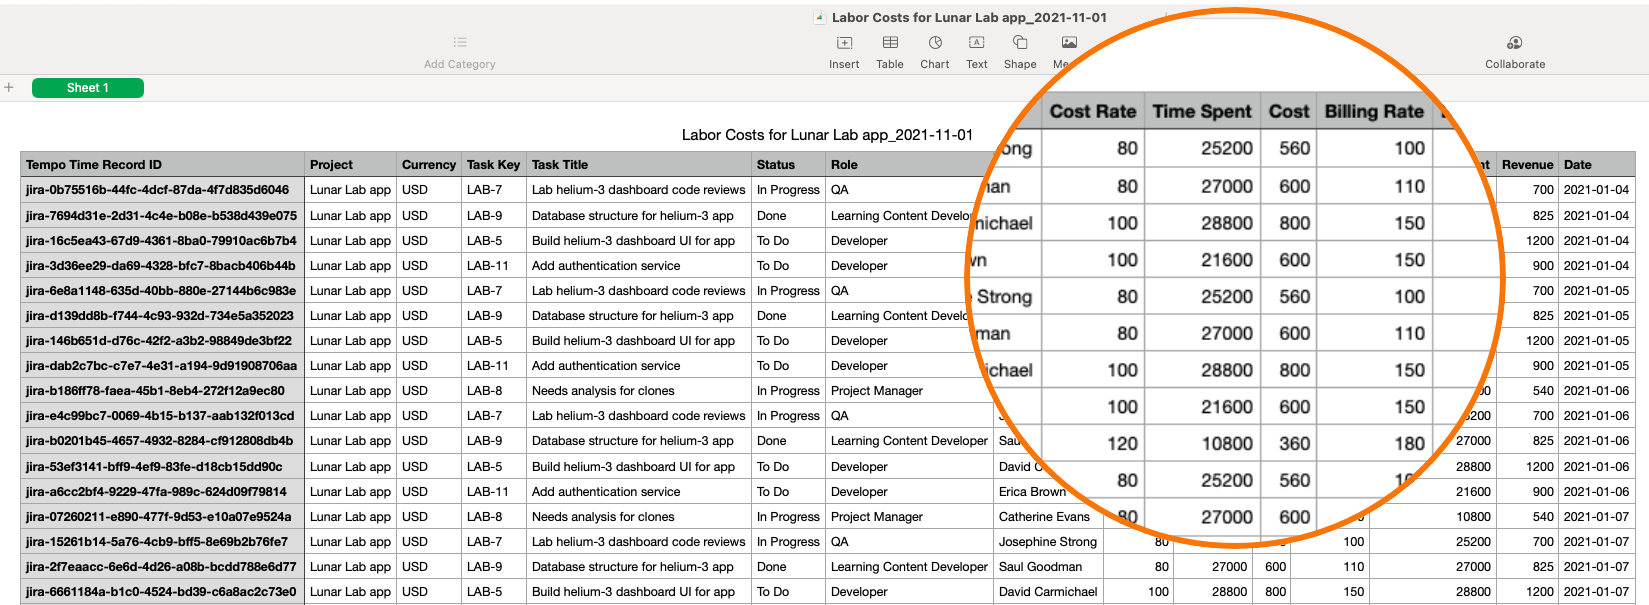 Report on project scope or labor costs, as shown on this image.